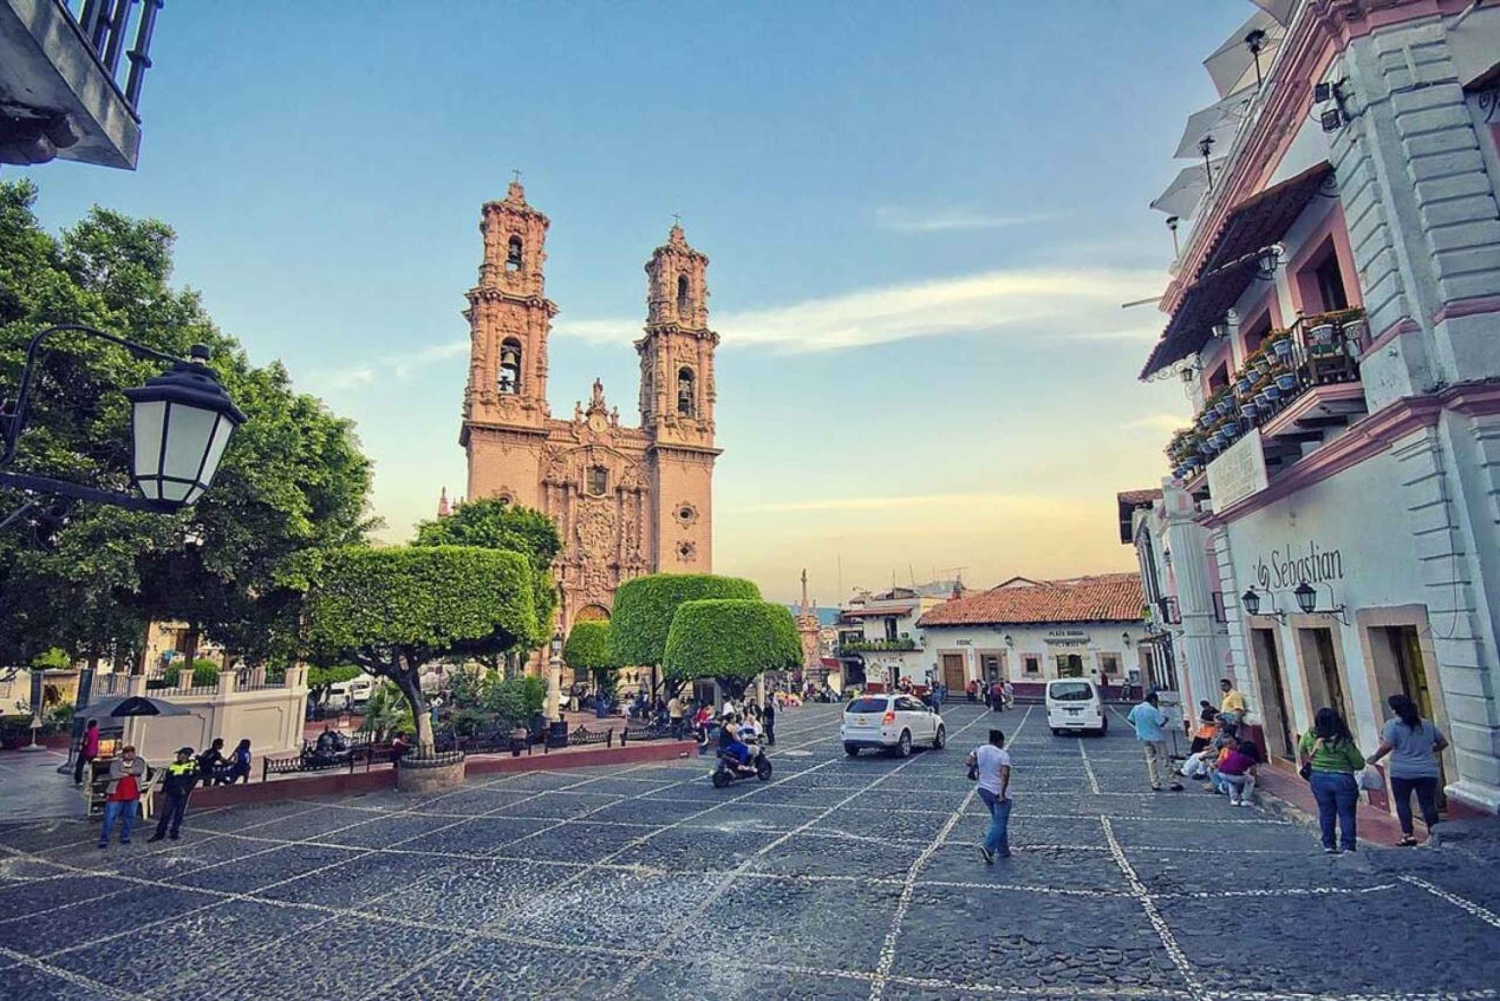 From Mexico City: Taxco and Cuernavaca by van